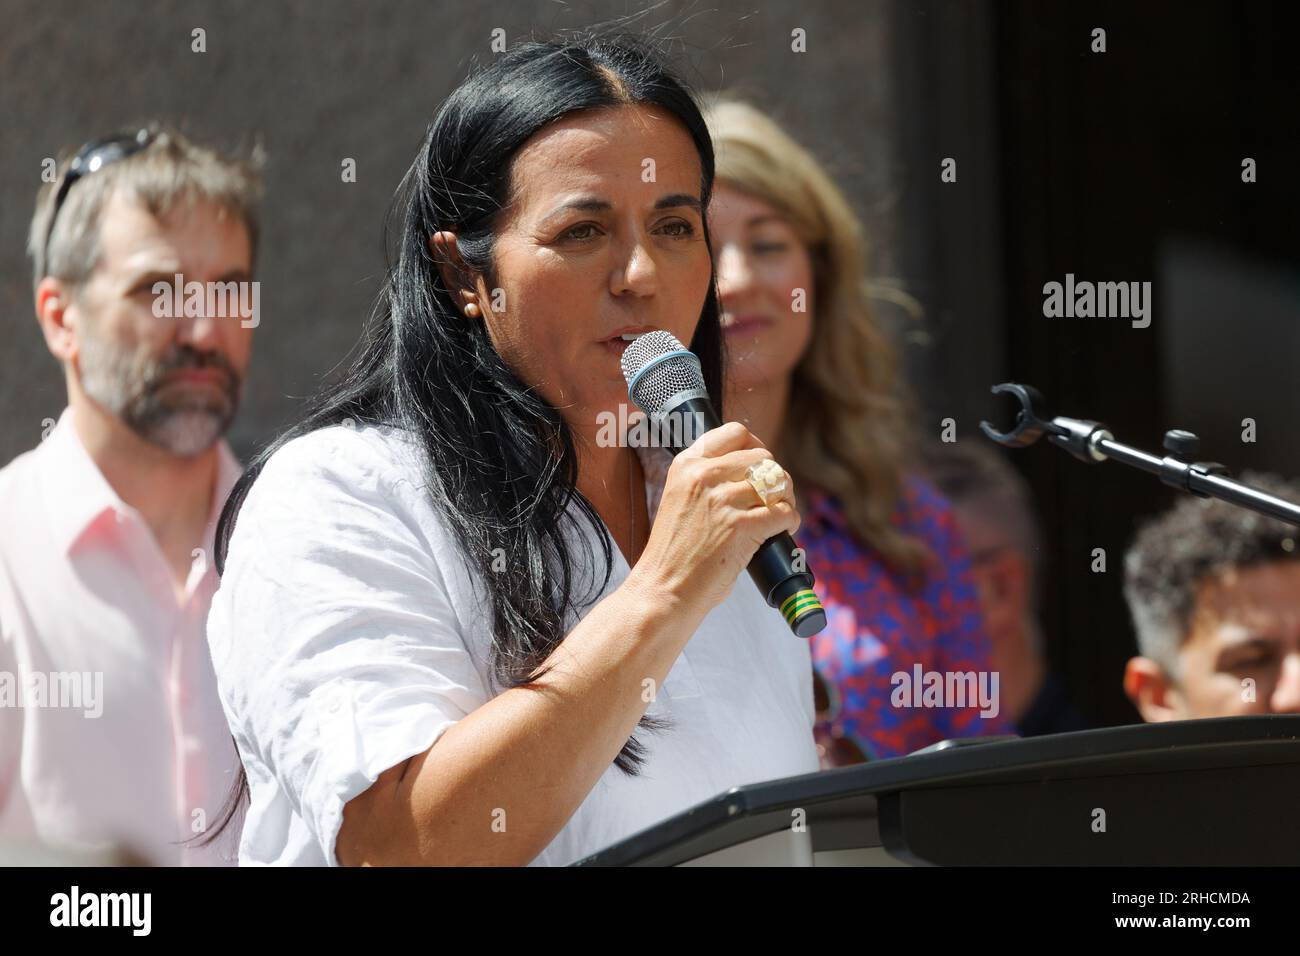 Soraya Martinez Ferrada, Minidter of tourism, gives a speech outside, before the start of the Montreal Pride Parade. Montreal,Quebec,Canada Stock Photo